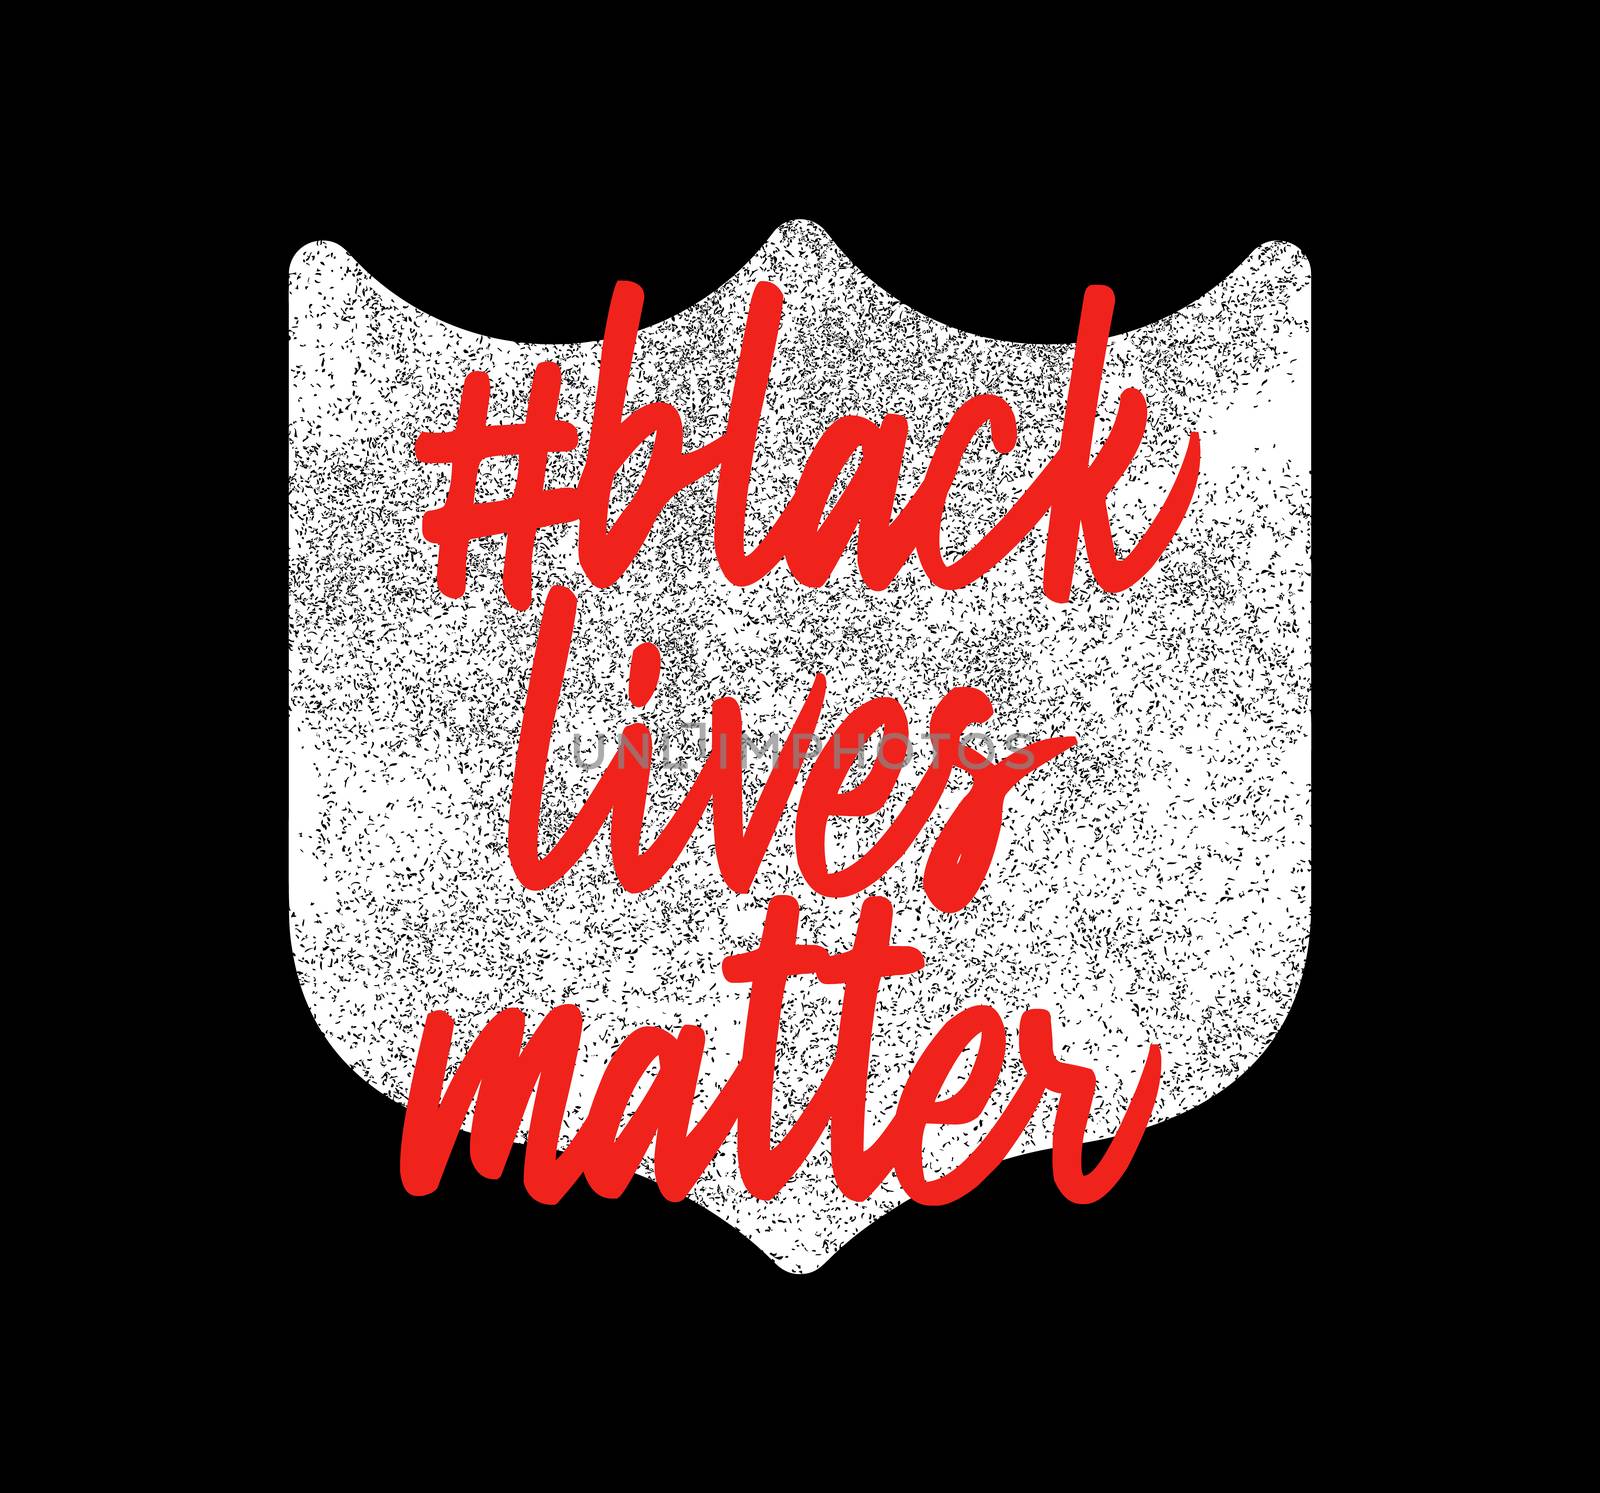 Black lives matter on guard shield. No to racism.Police violence. stop violence.Flat vector illustration.For banners, posters, and social networks. Vector illustration